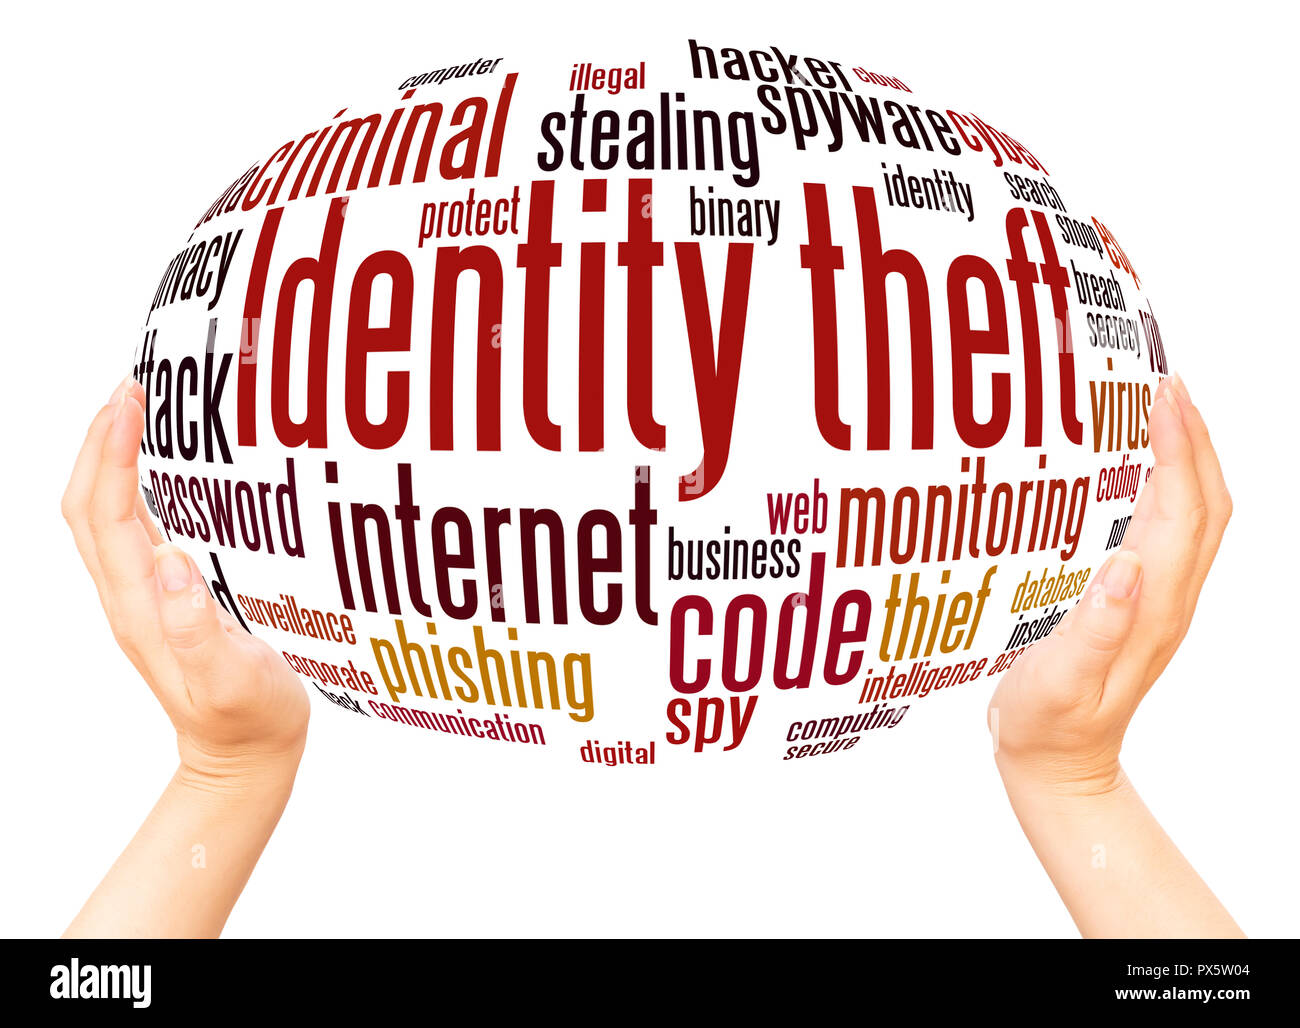 Identity theft word cloud hand sphere concept on white background. Stock Photo